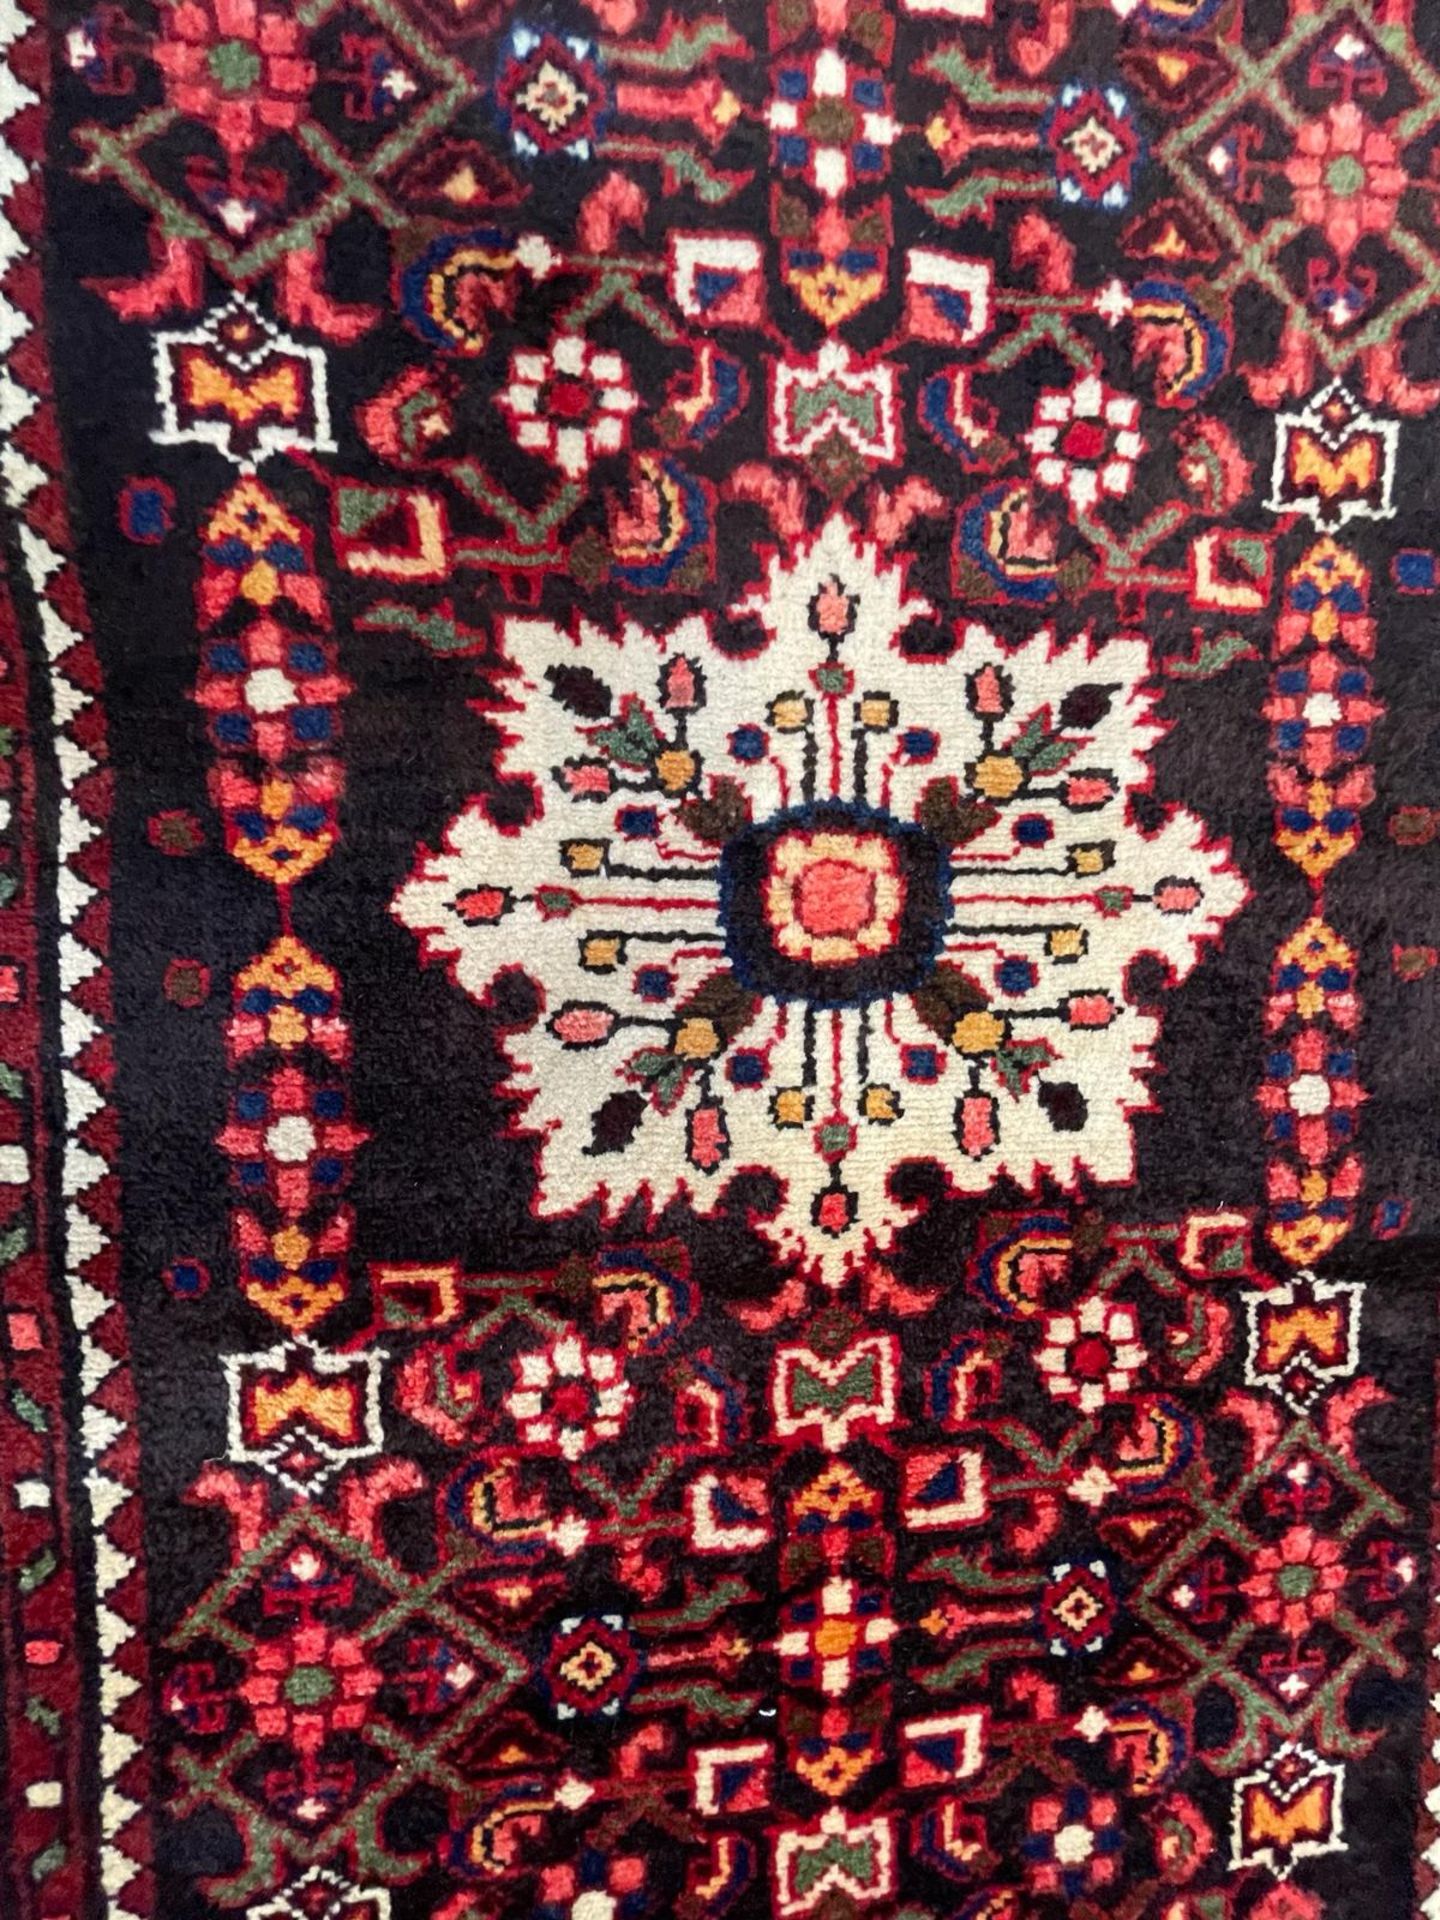 20TH CENTURY NORTH-WEST PERSIAN MALEYER RUNNER RUG - Image 2 of 5